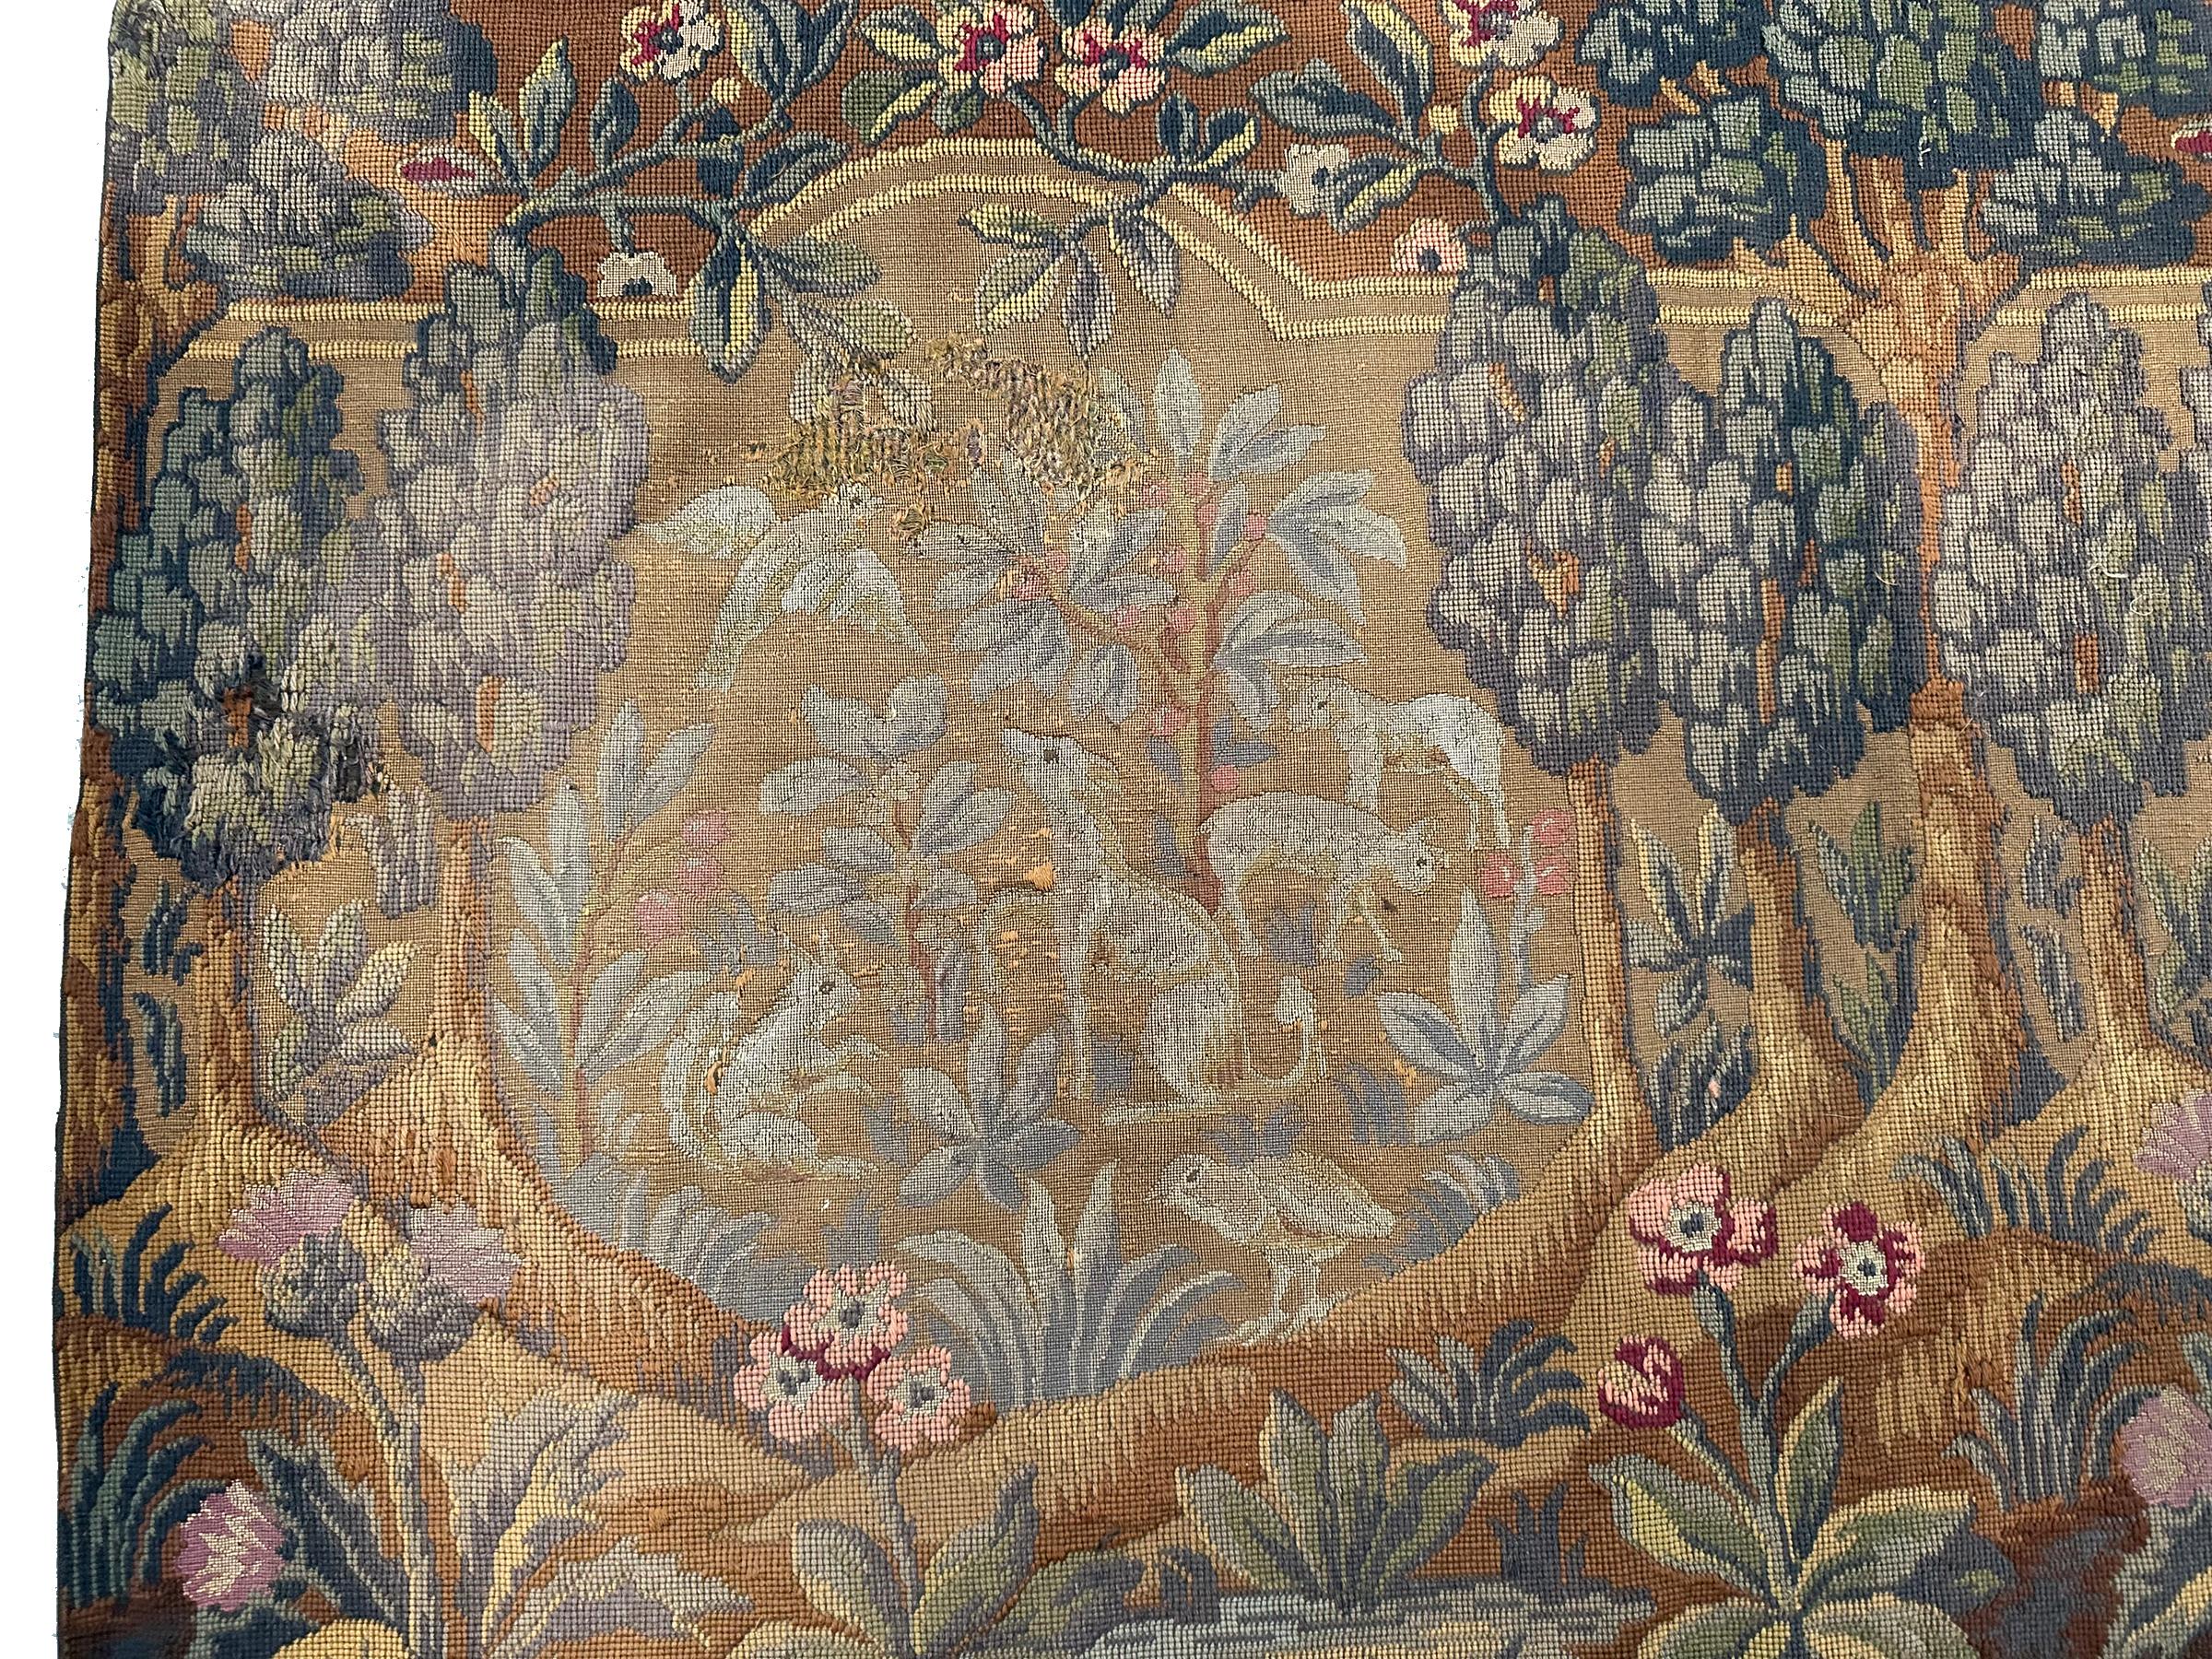 Hand-Woven 1920 Antique English Needlepoint Tapestry Wool & Silk 3x5 82cm x 158cm For Sale